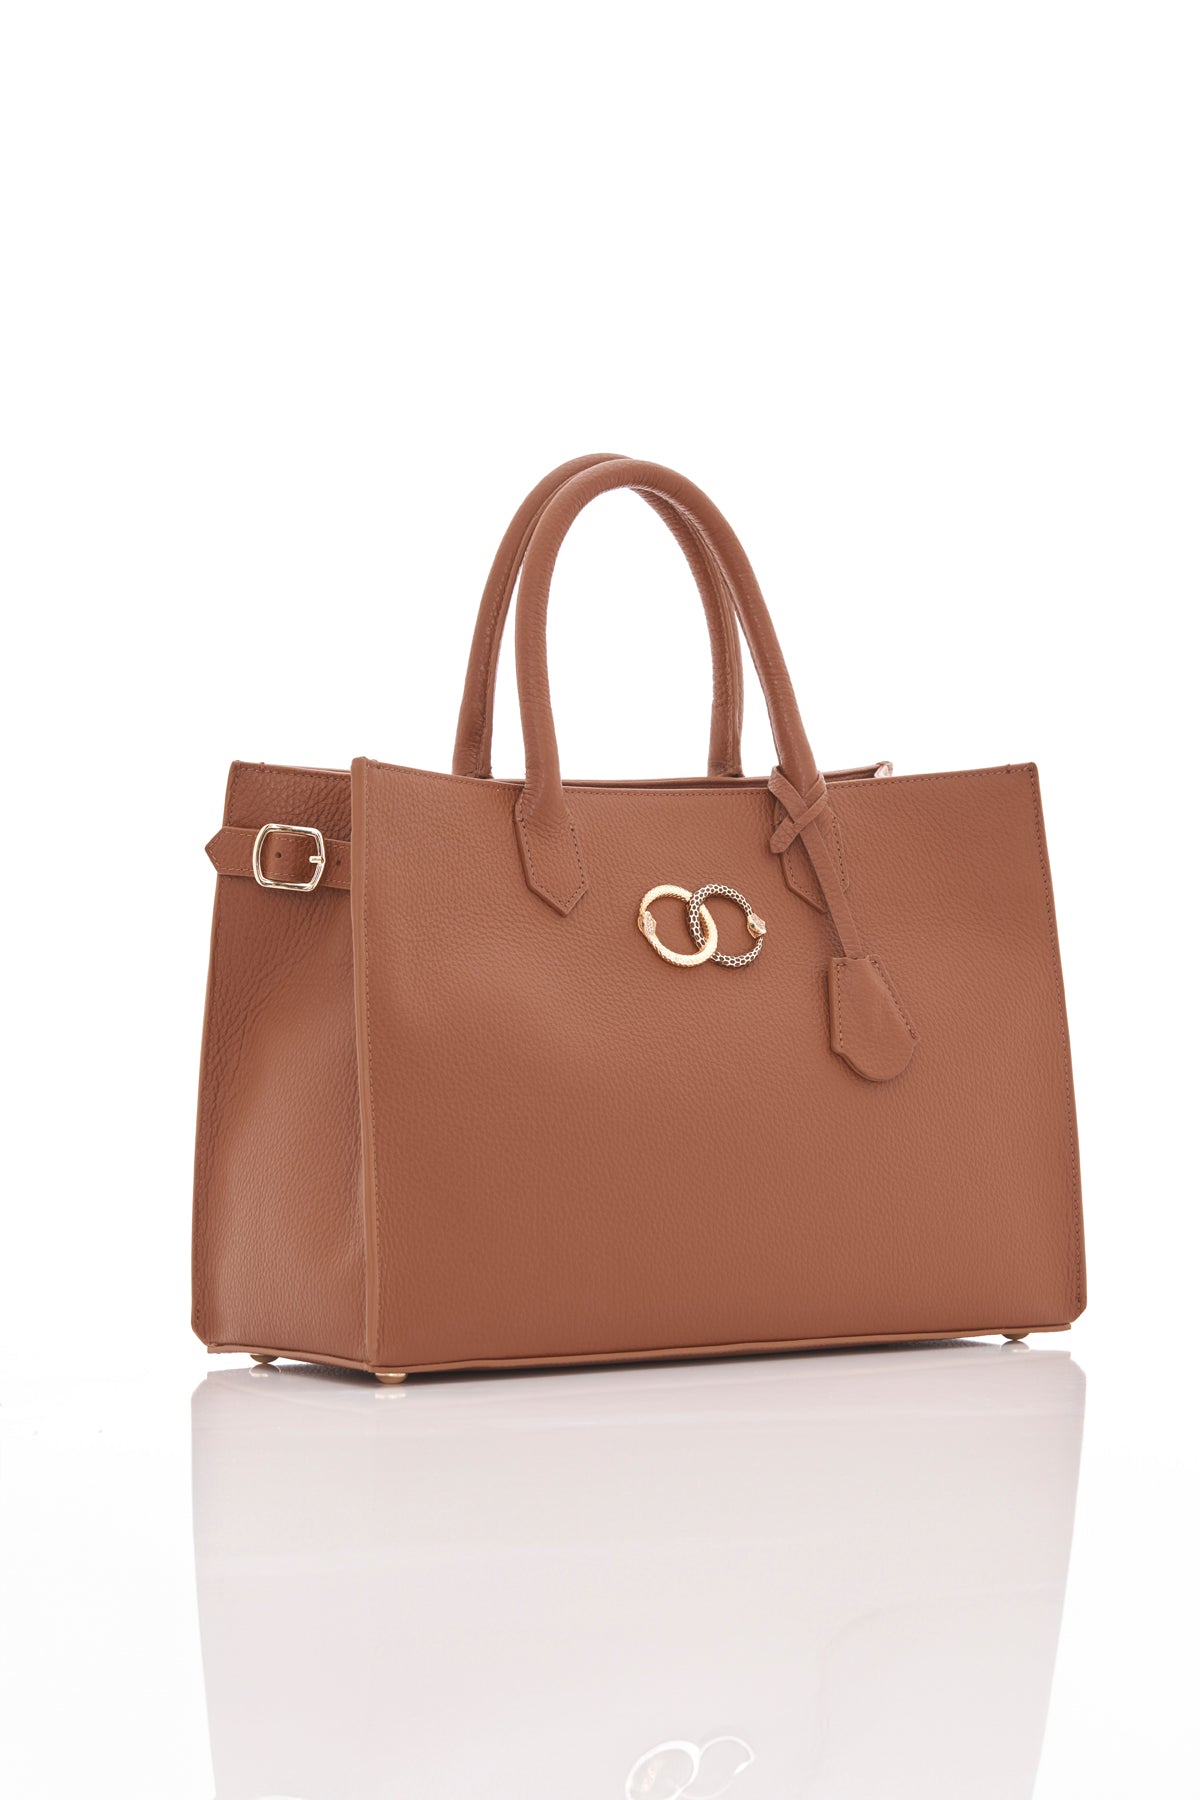 caramel brown ouroboros genuine leather women's tote bag side